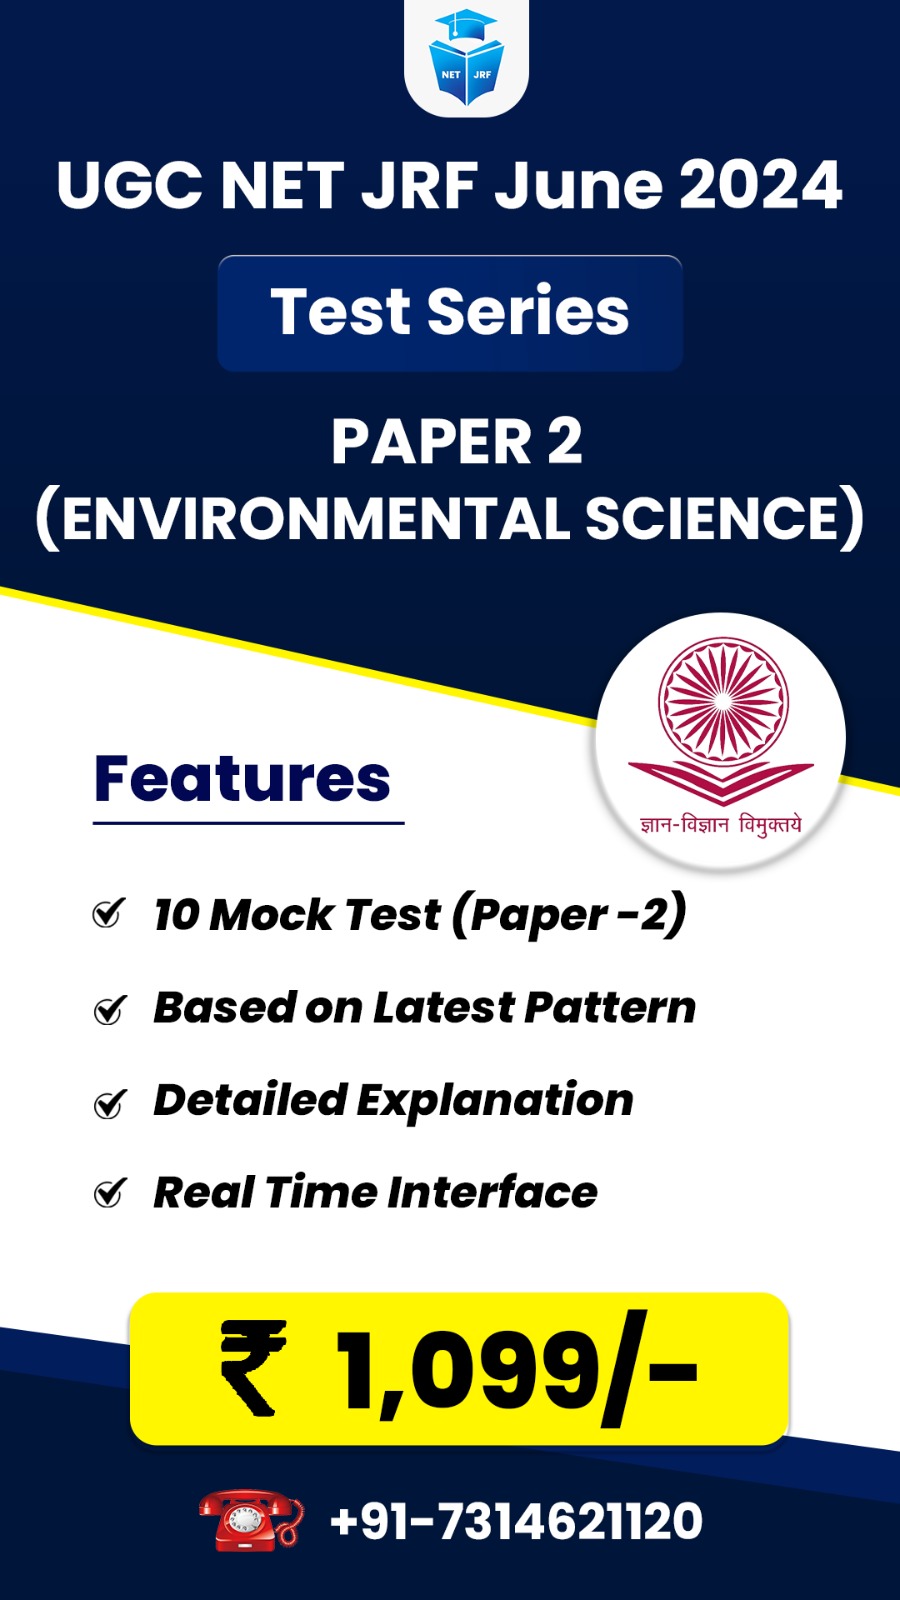 Environmental Science (Paper 2) Test Series for June 2024